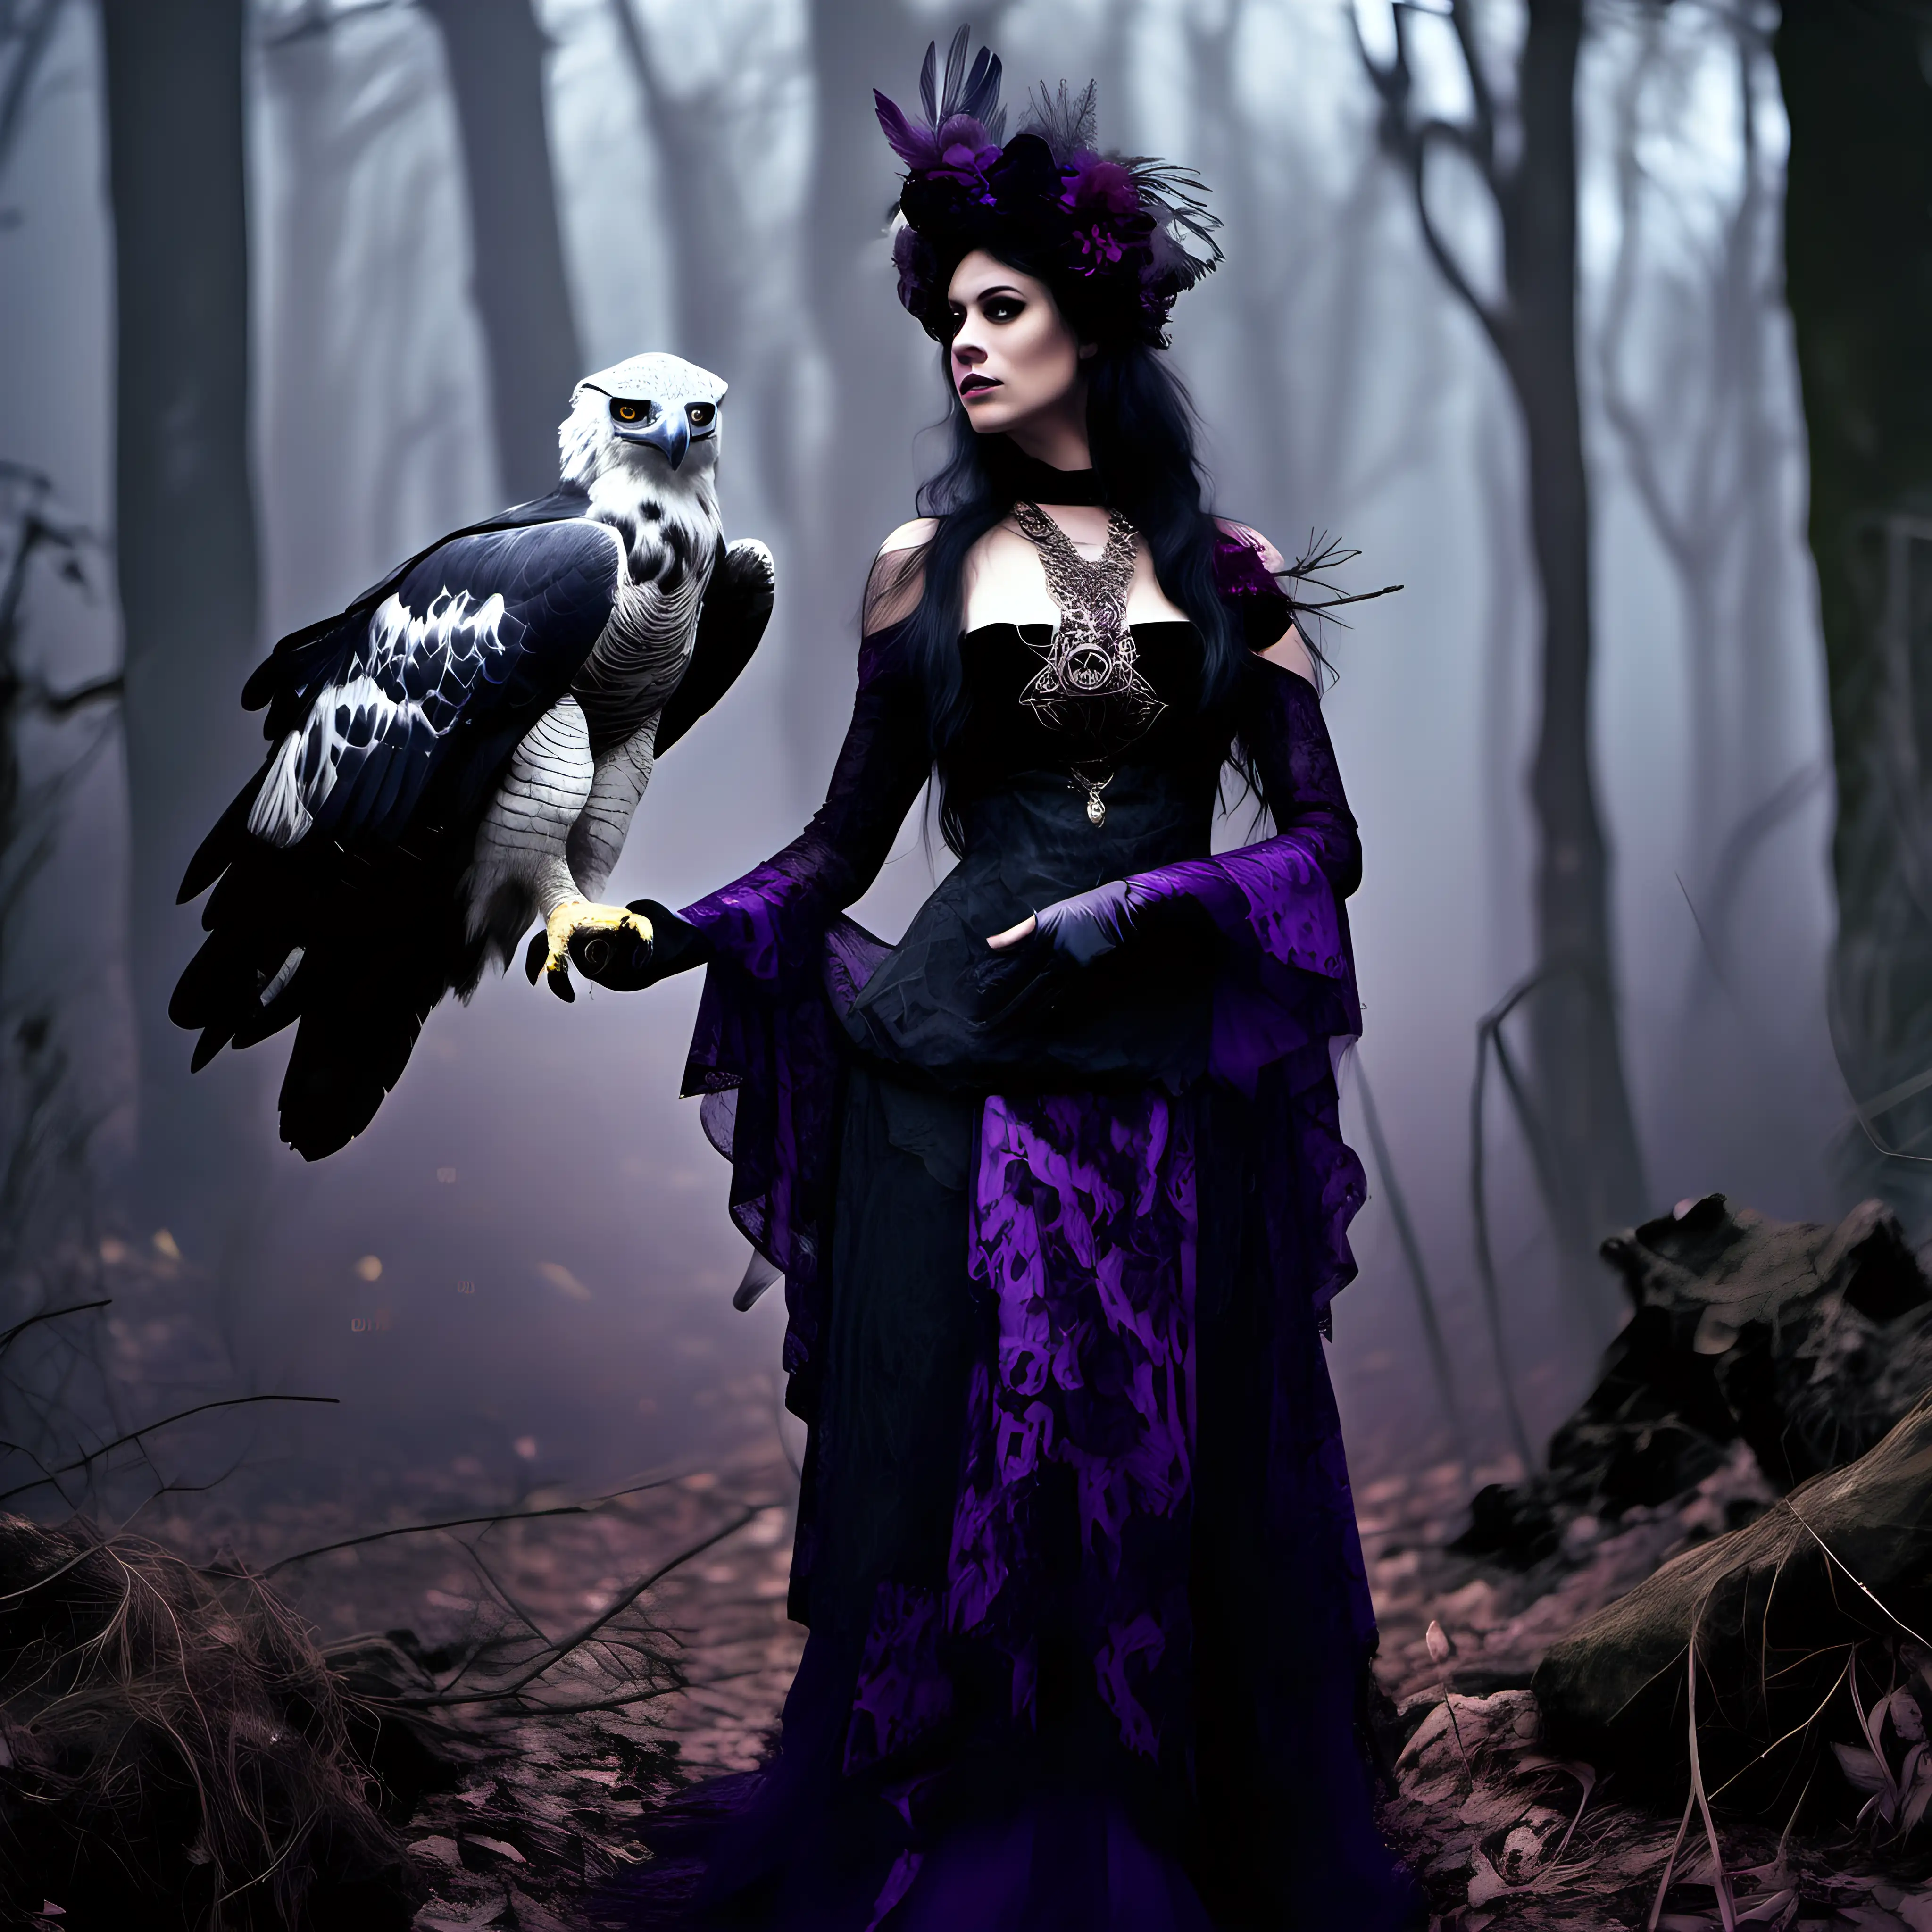 Mystical Seeress with Harpy Eagle in Enchanted Forest